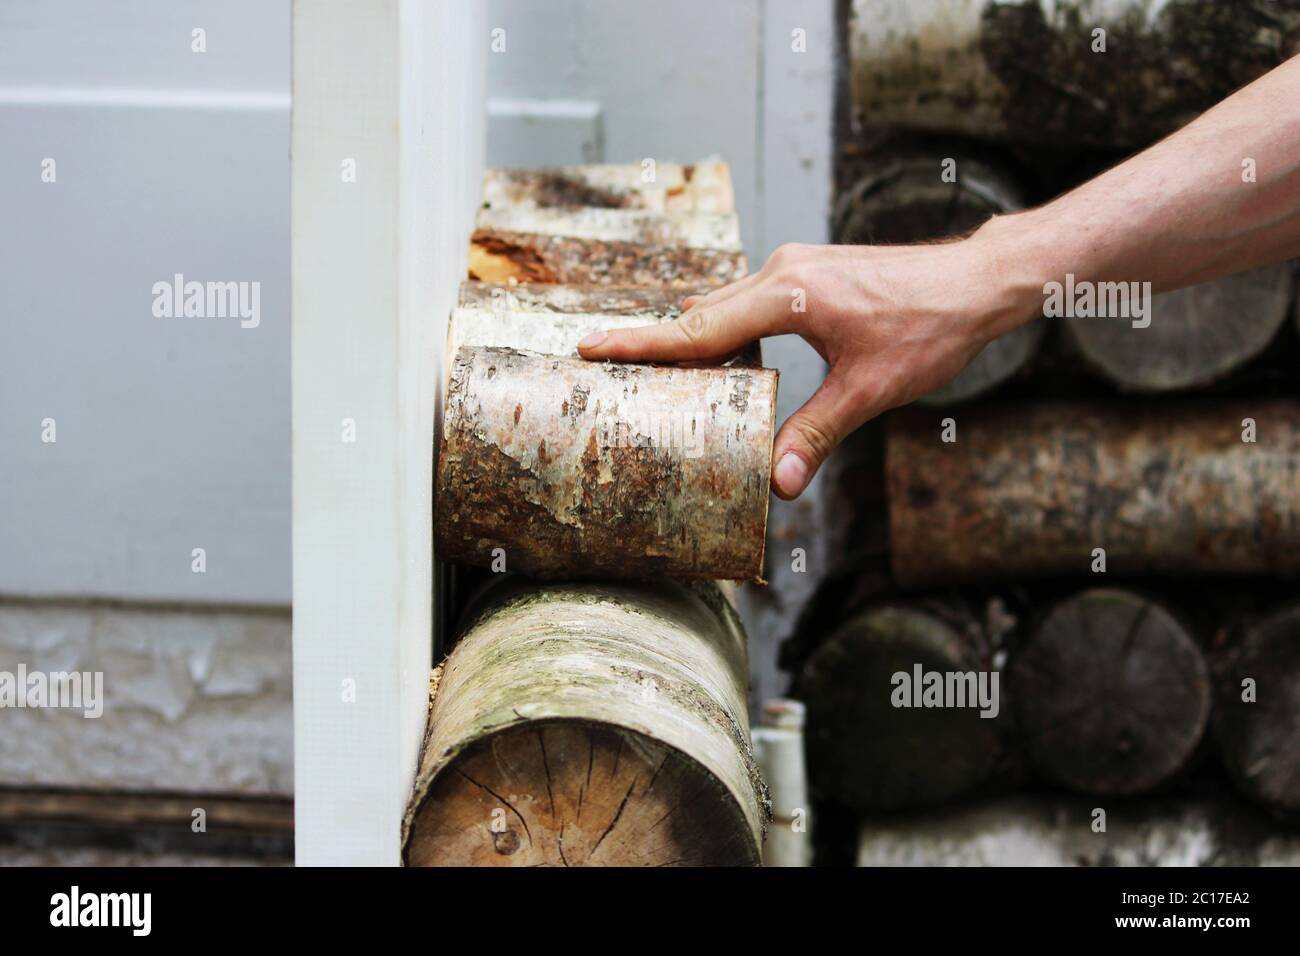 The worker restores a window in the historical building - a birch house of the Gatchina park, fastening pieces of birch with a s Stock Photo